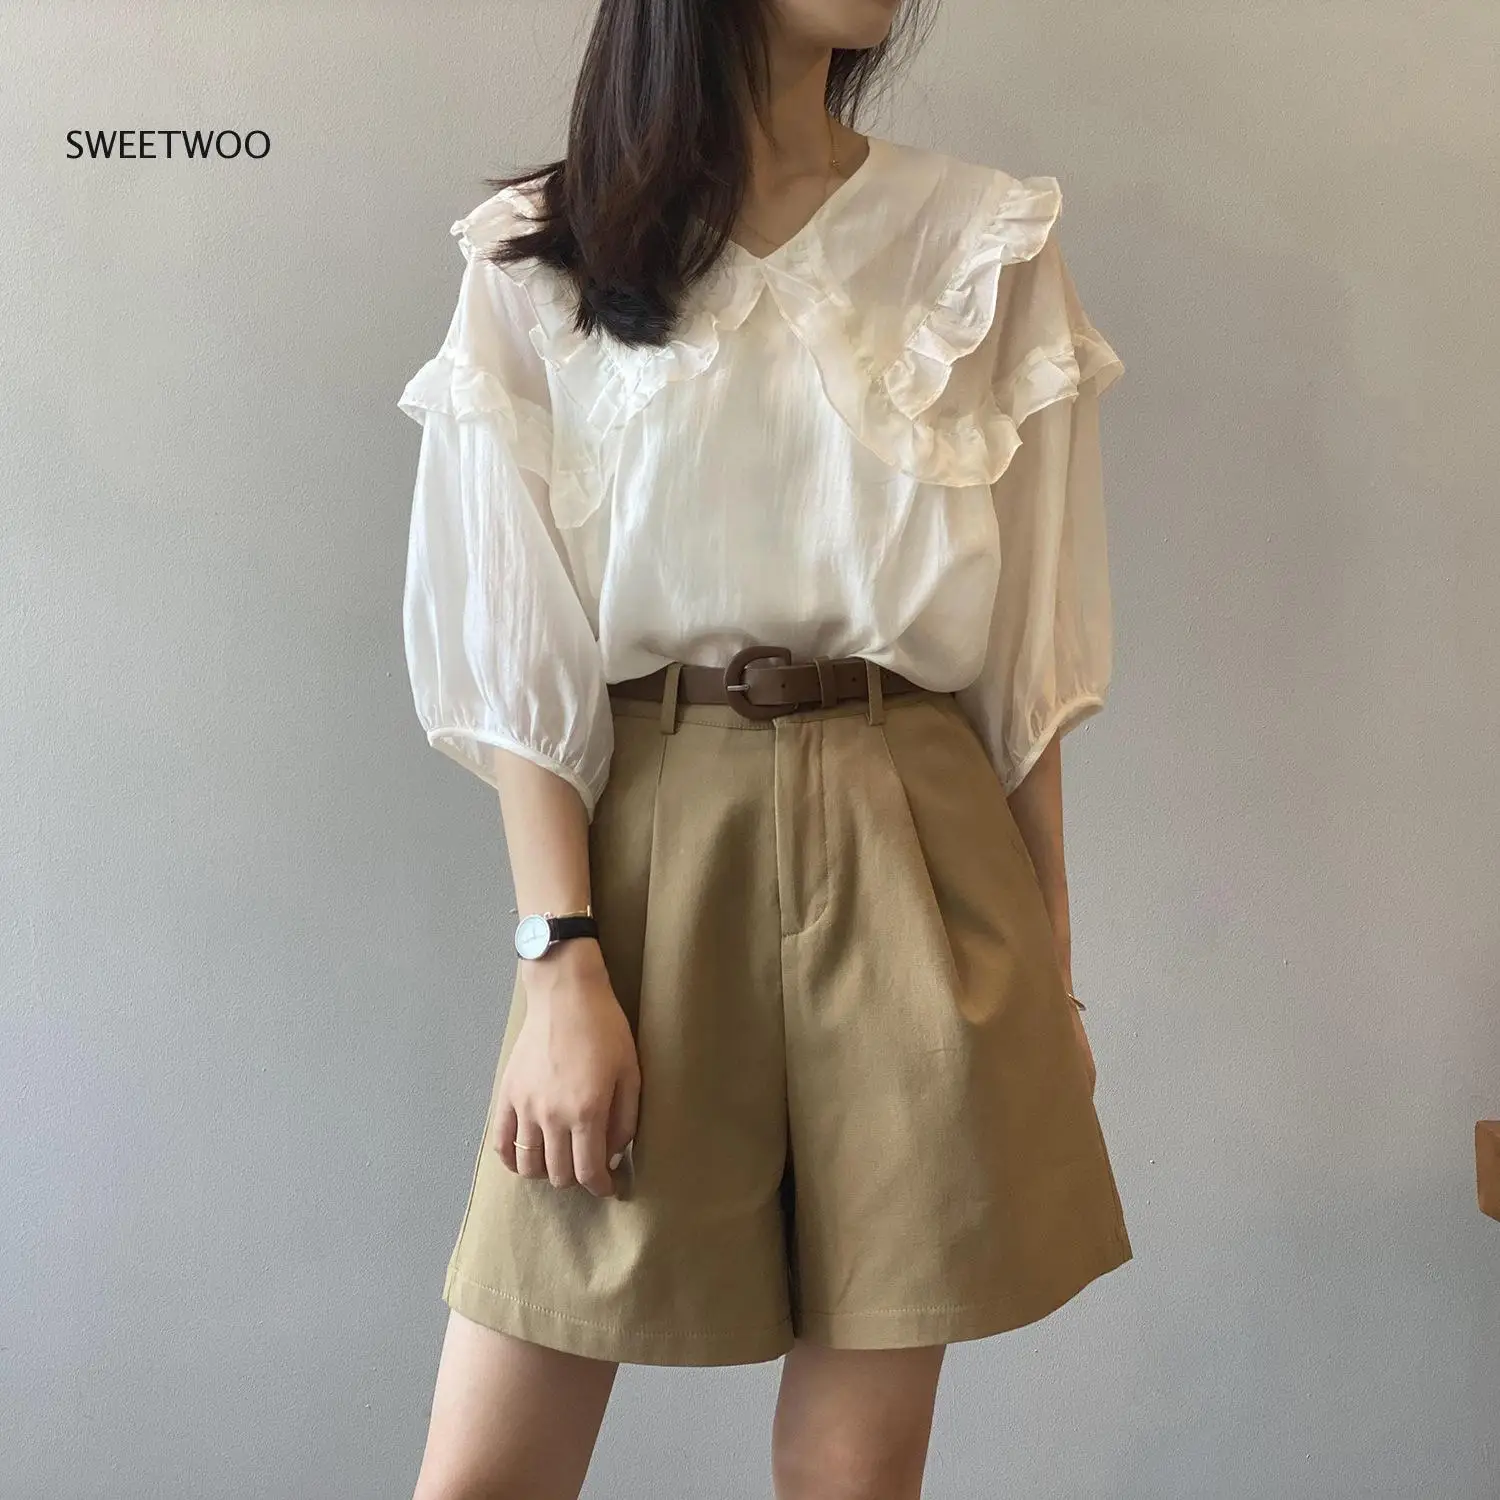 2022 Summer New V Neck Ruffle T-shirt for Women Korean Simple Casual Short Sleeve T Shirts Female Solid Color Tops Tees